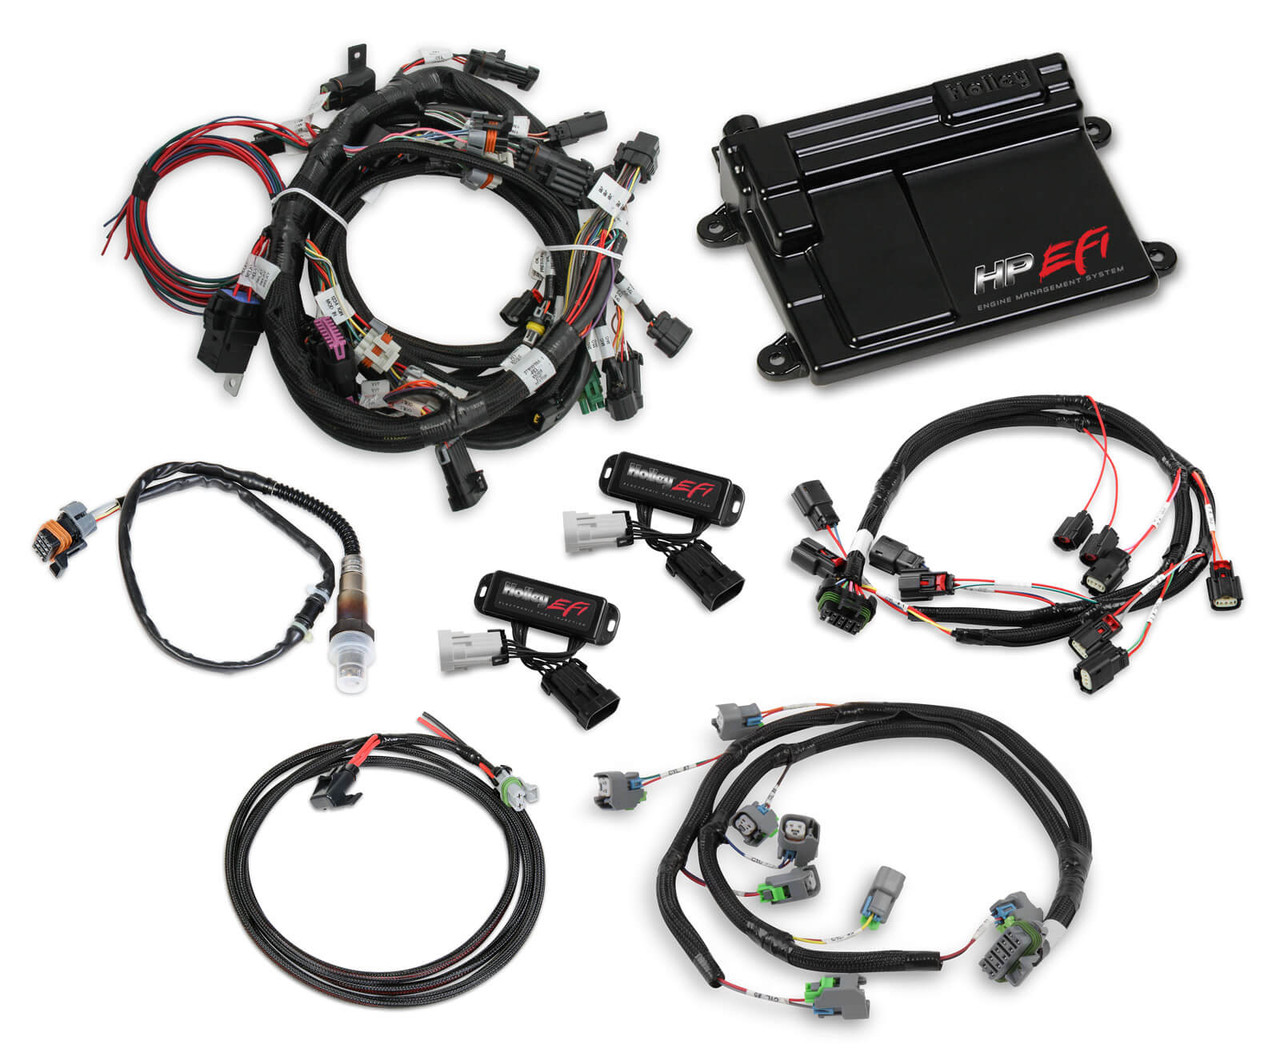 550-628 Holley EFI Ford Coyote Ti-VCT Capable HP EFI Kit,  Bosch O2